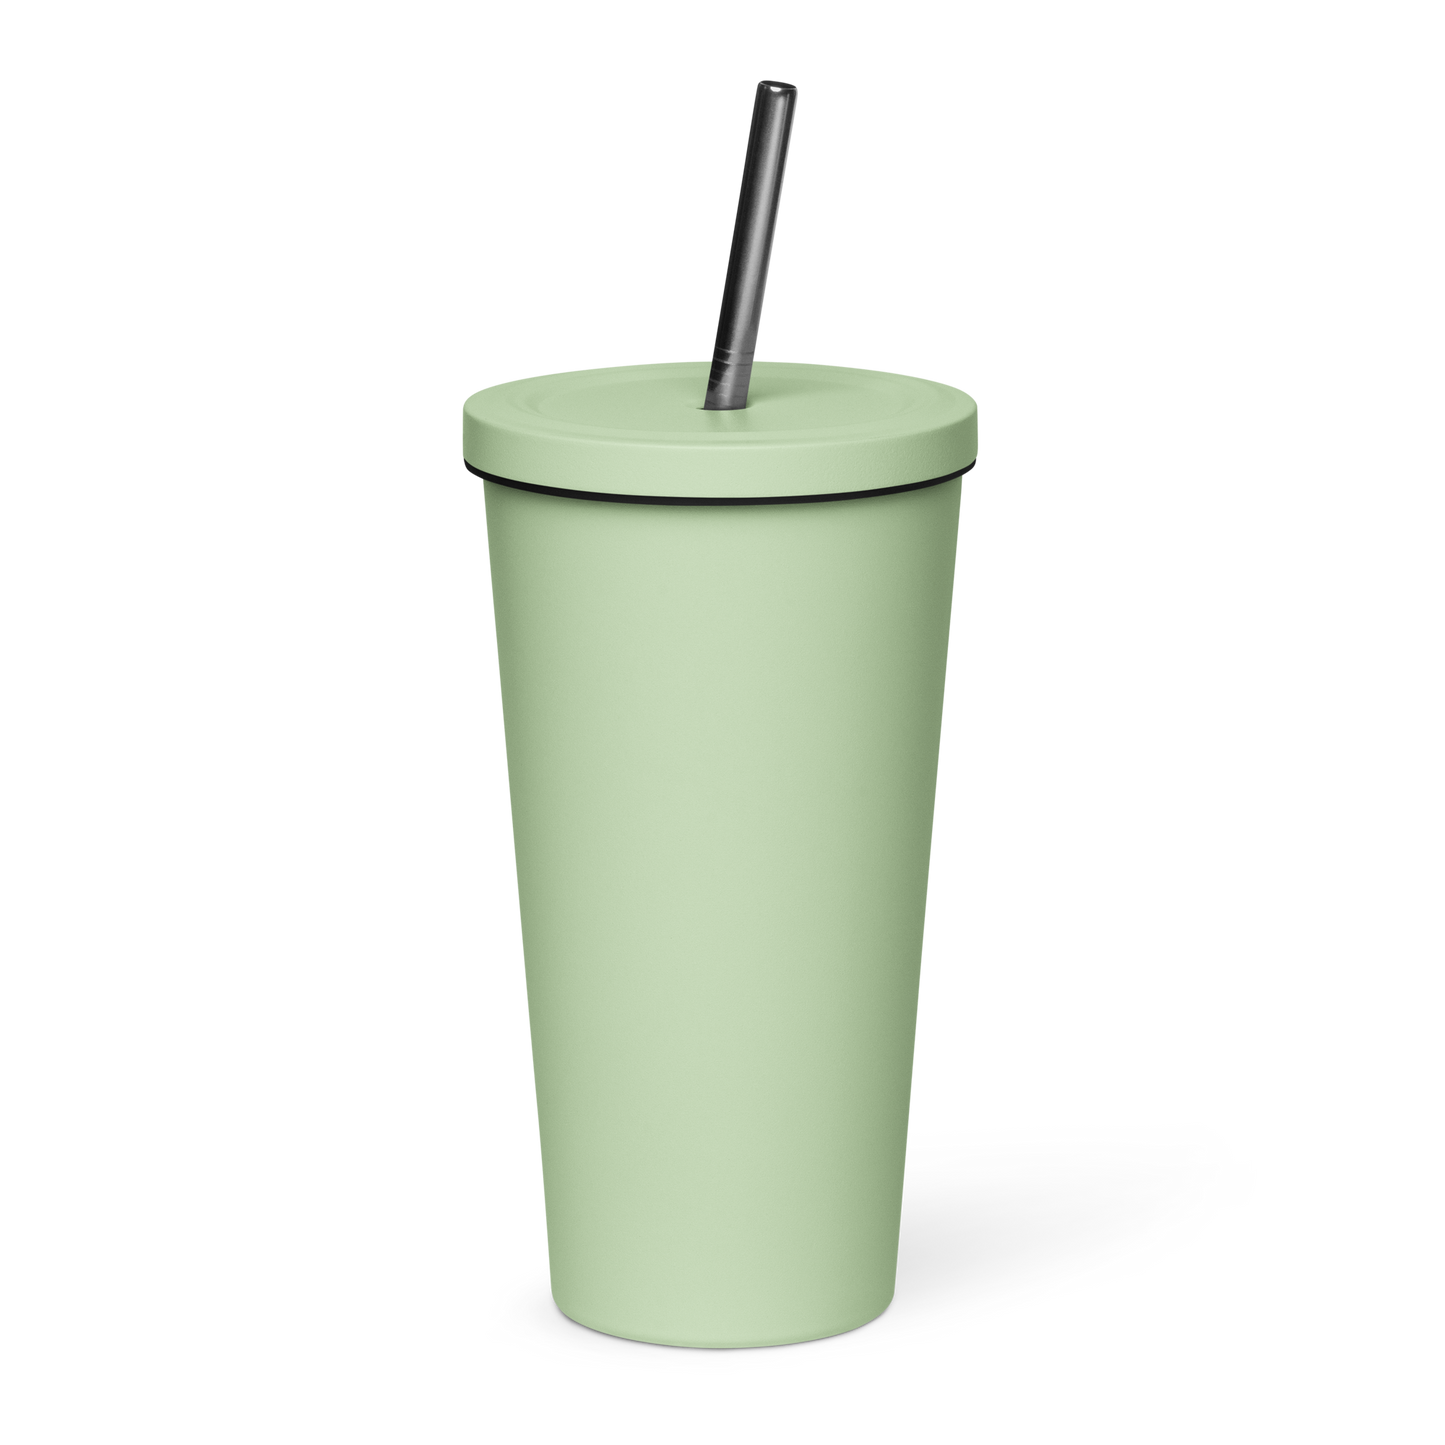 Insulated tumbler with a straw (White Lettering)